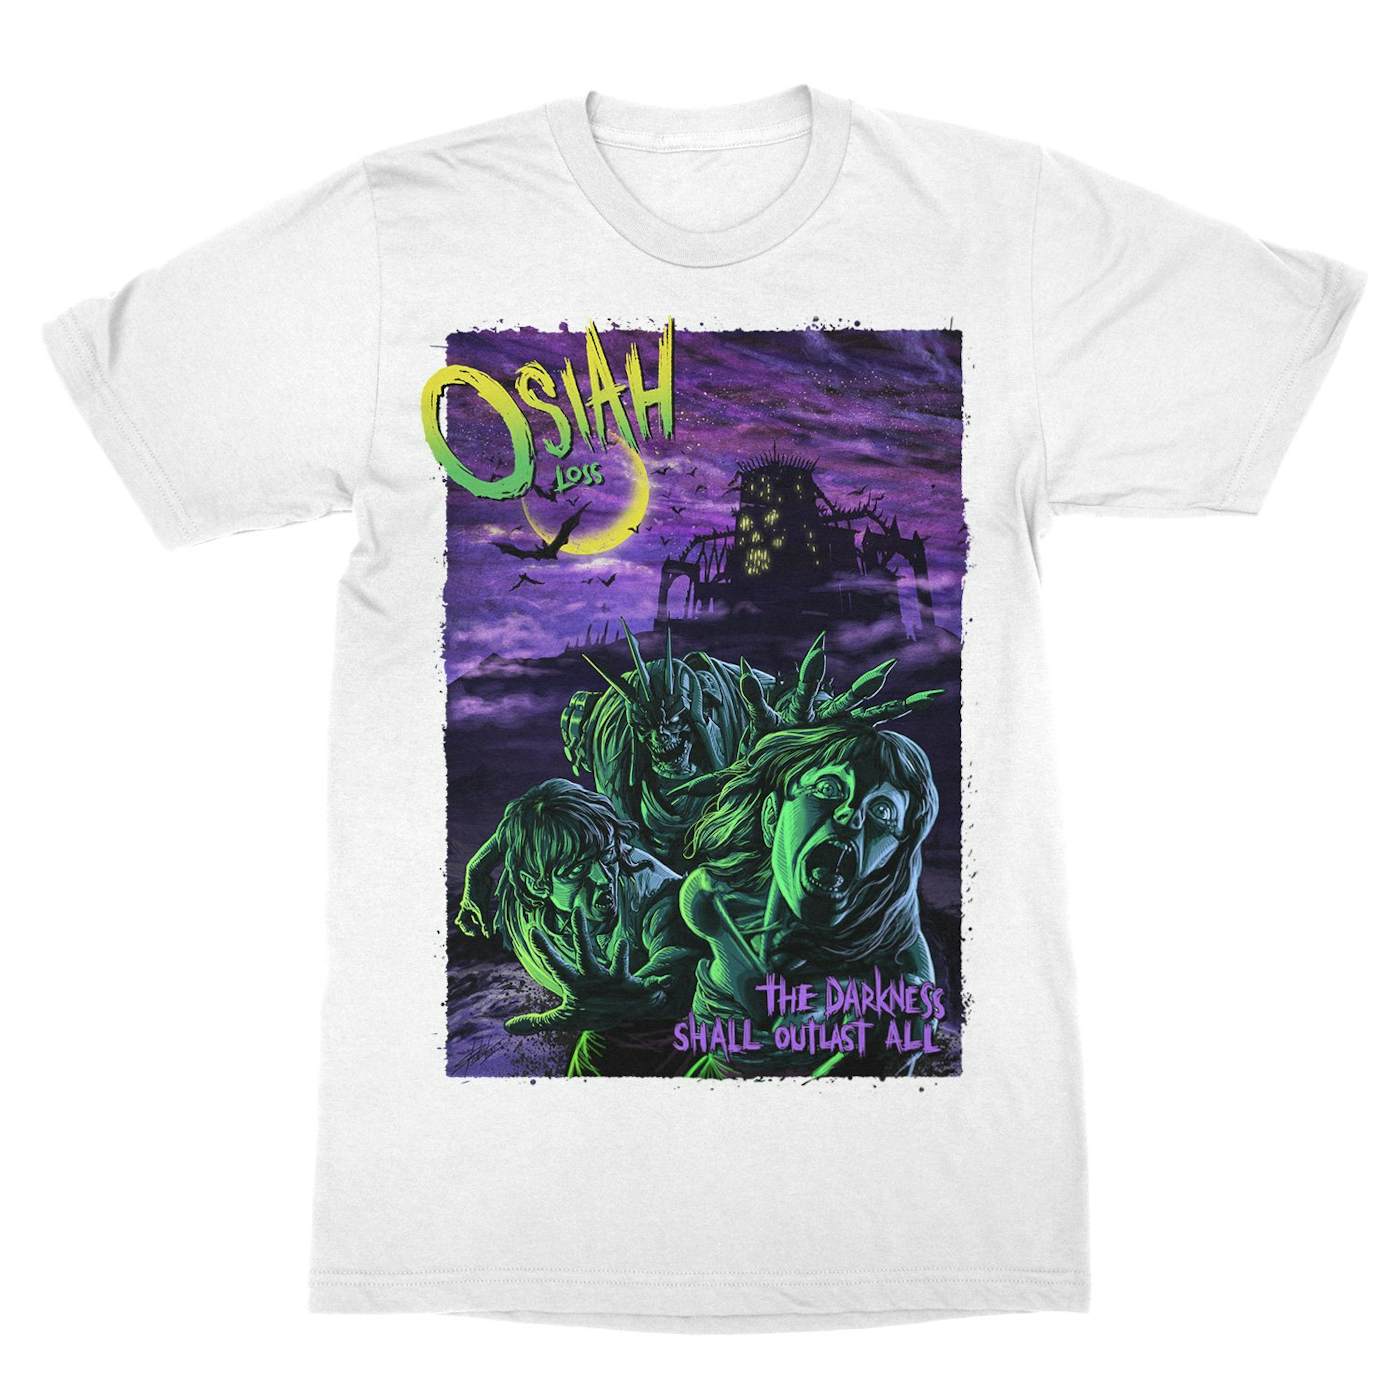 Osiah "Zombie" Collector's Edition T-Shirt